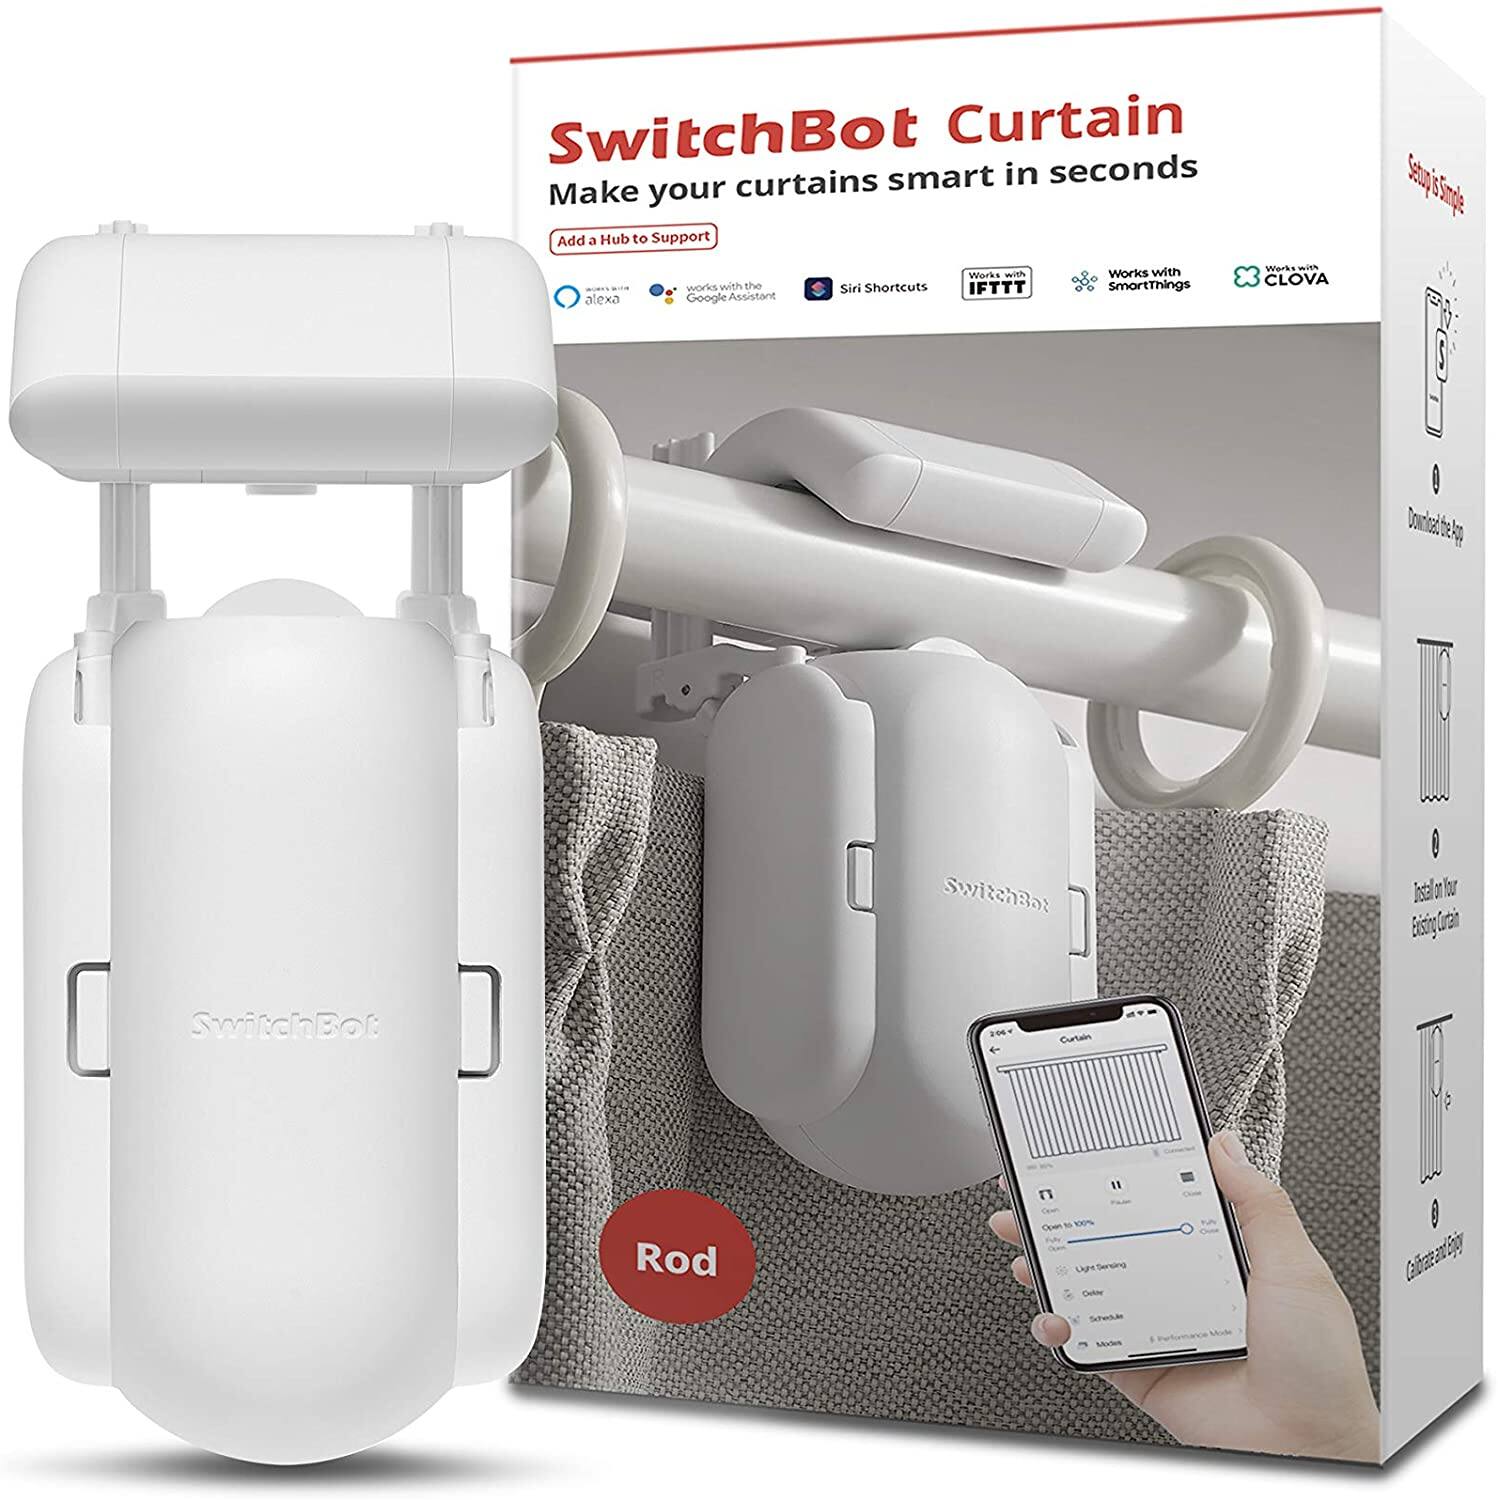 BUY ONE GET ONE! Buy SwitchBot Smart Curtain get SwitchBot Bot for free! $99